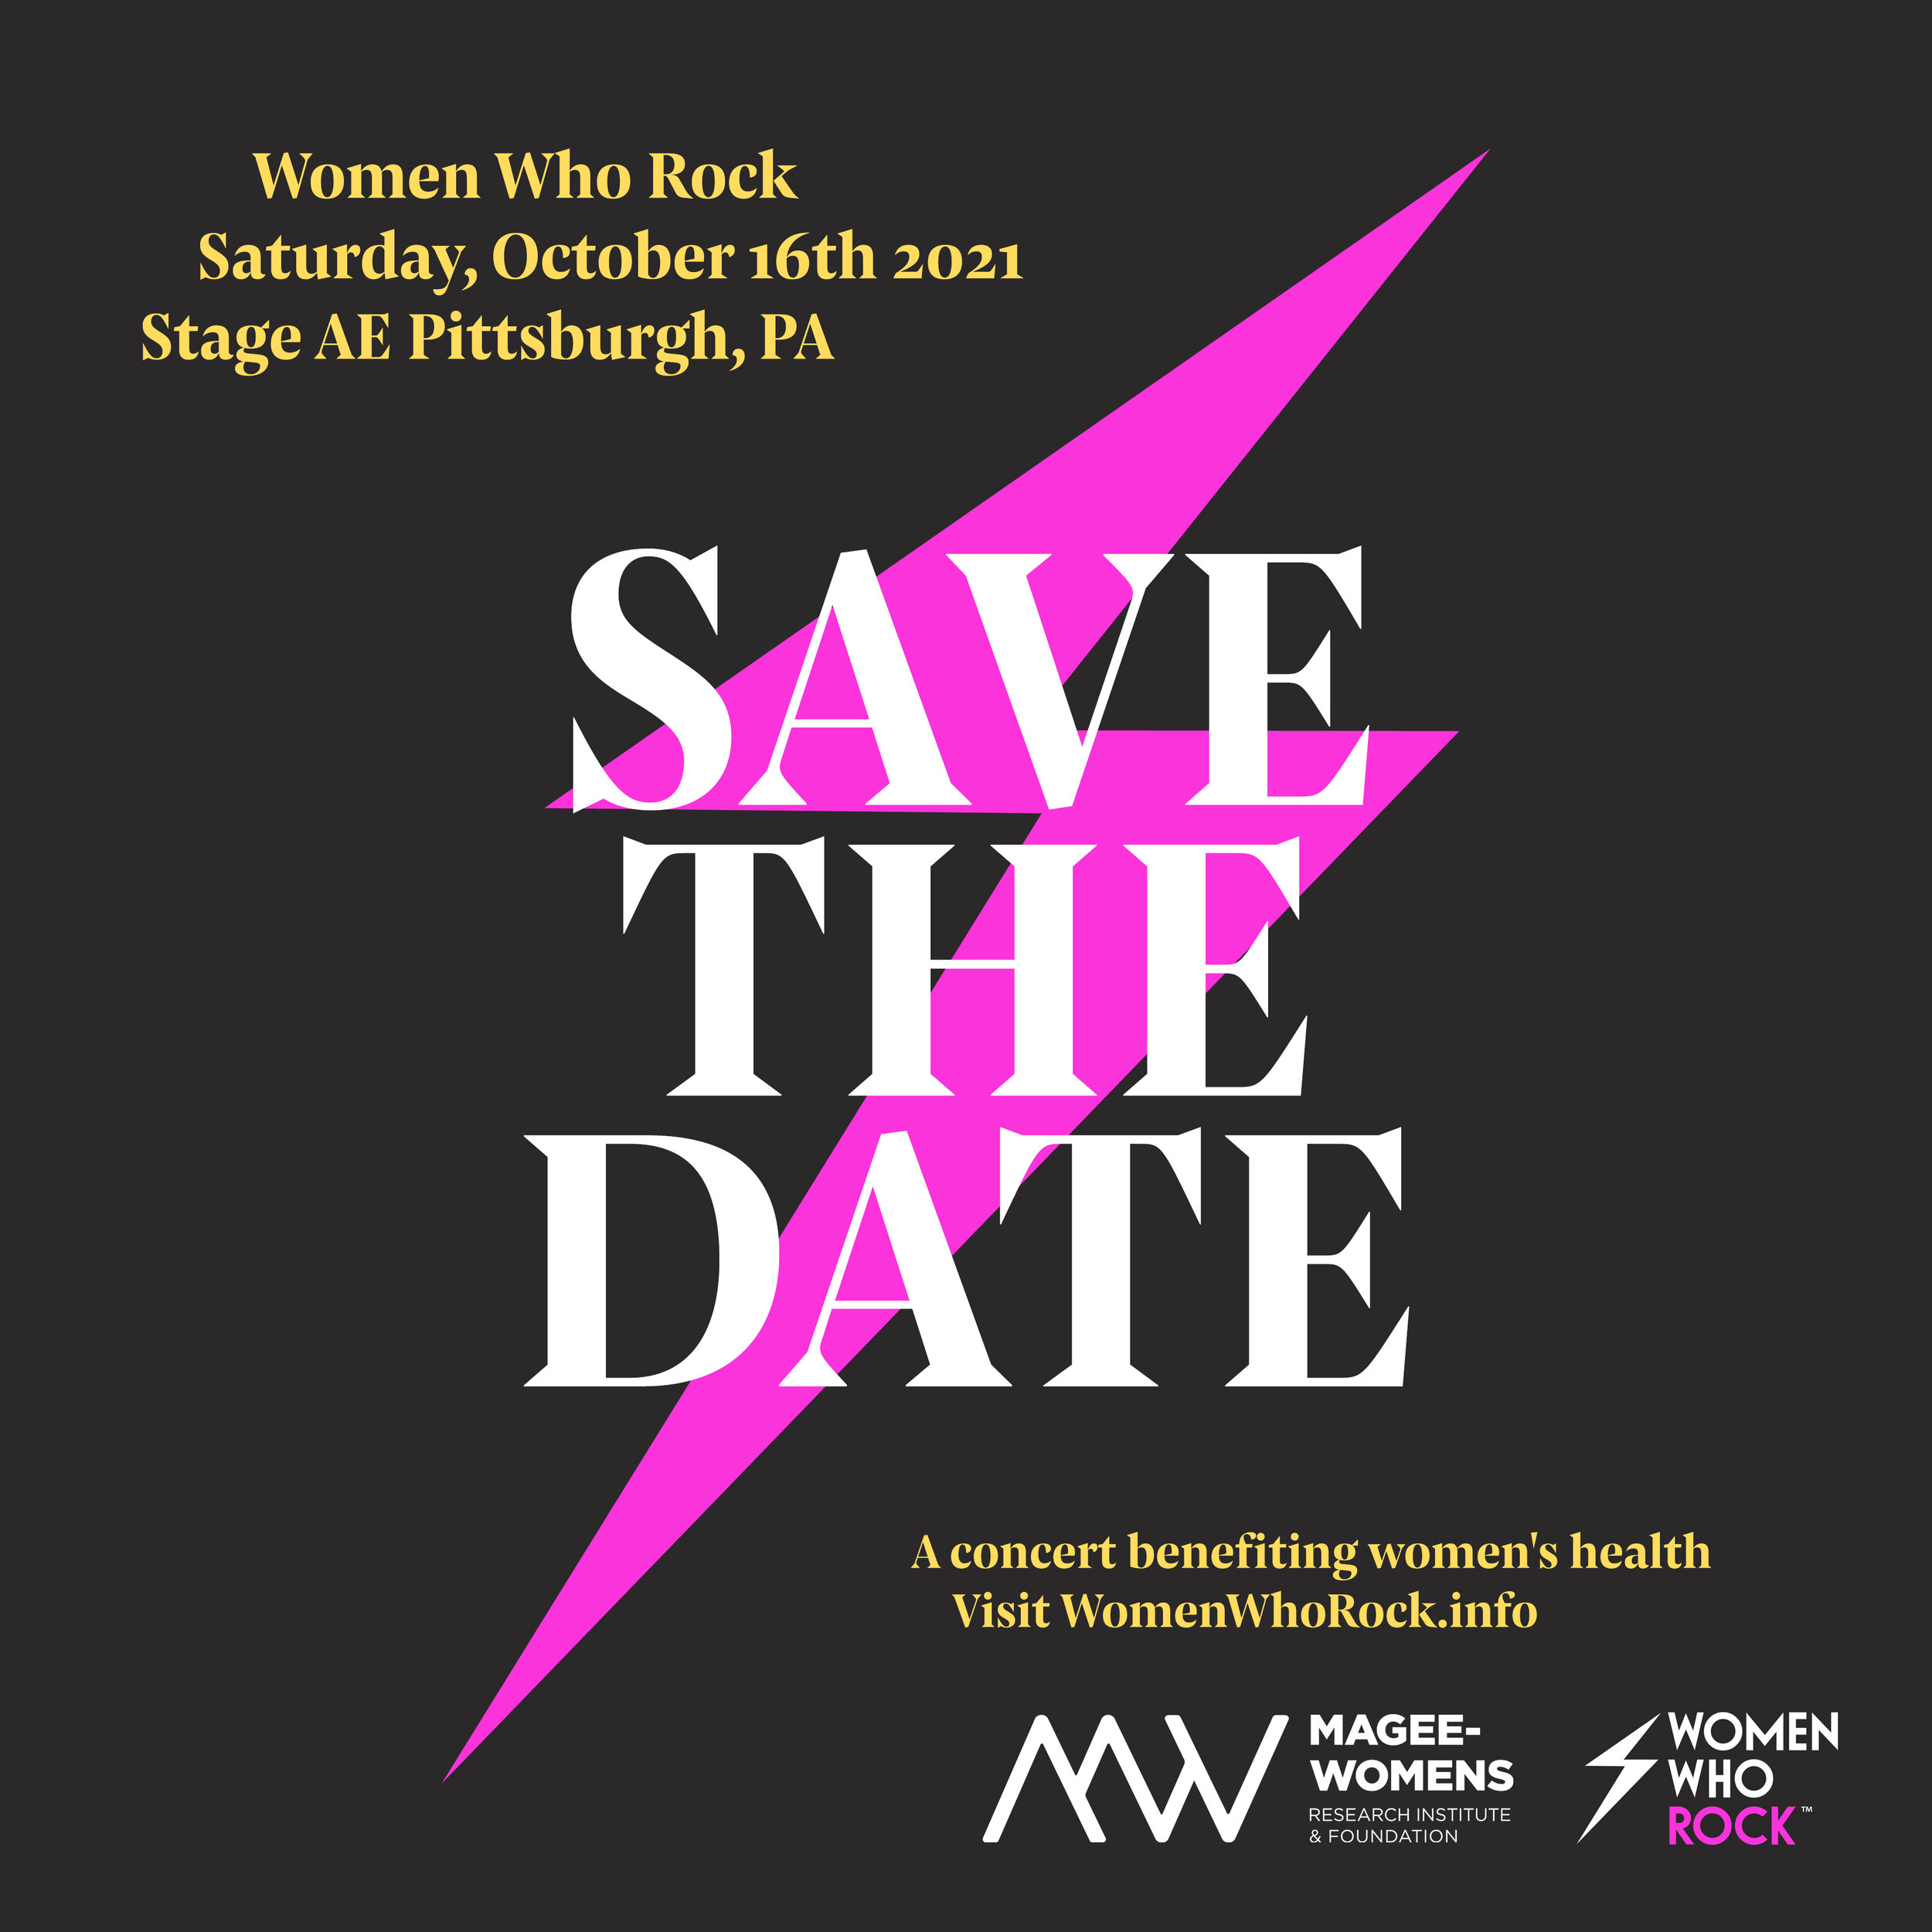 Details coming soon! For sponsorship opportunities contact melinda@womenwhorock.info